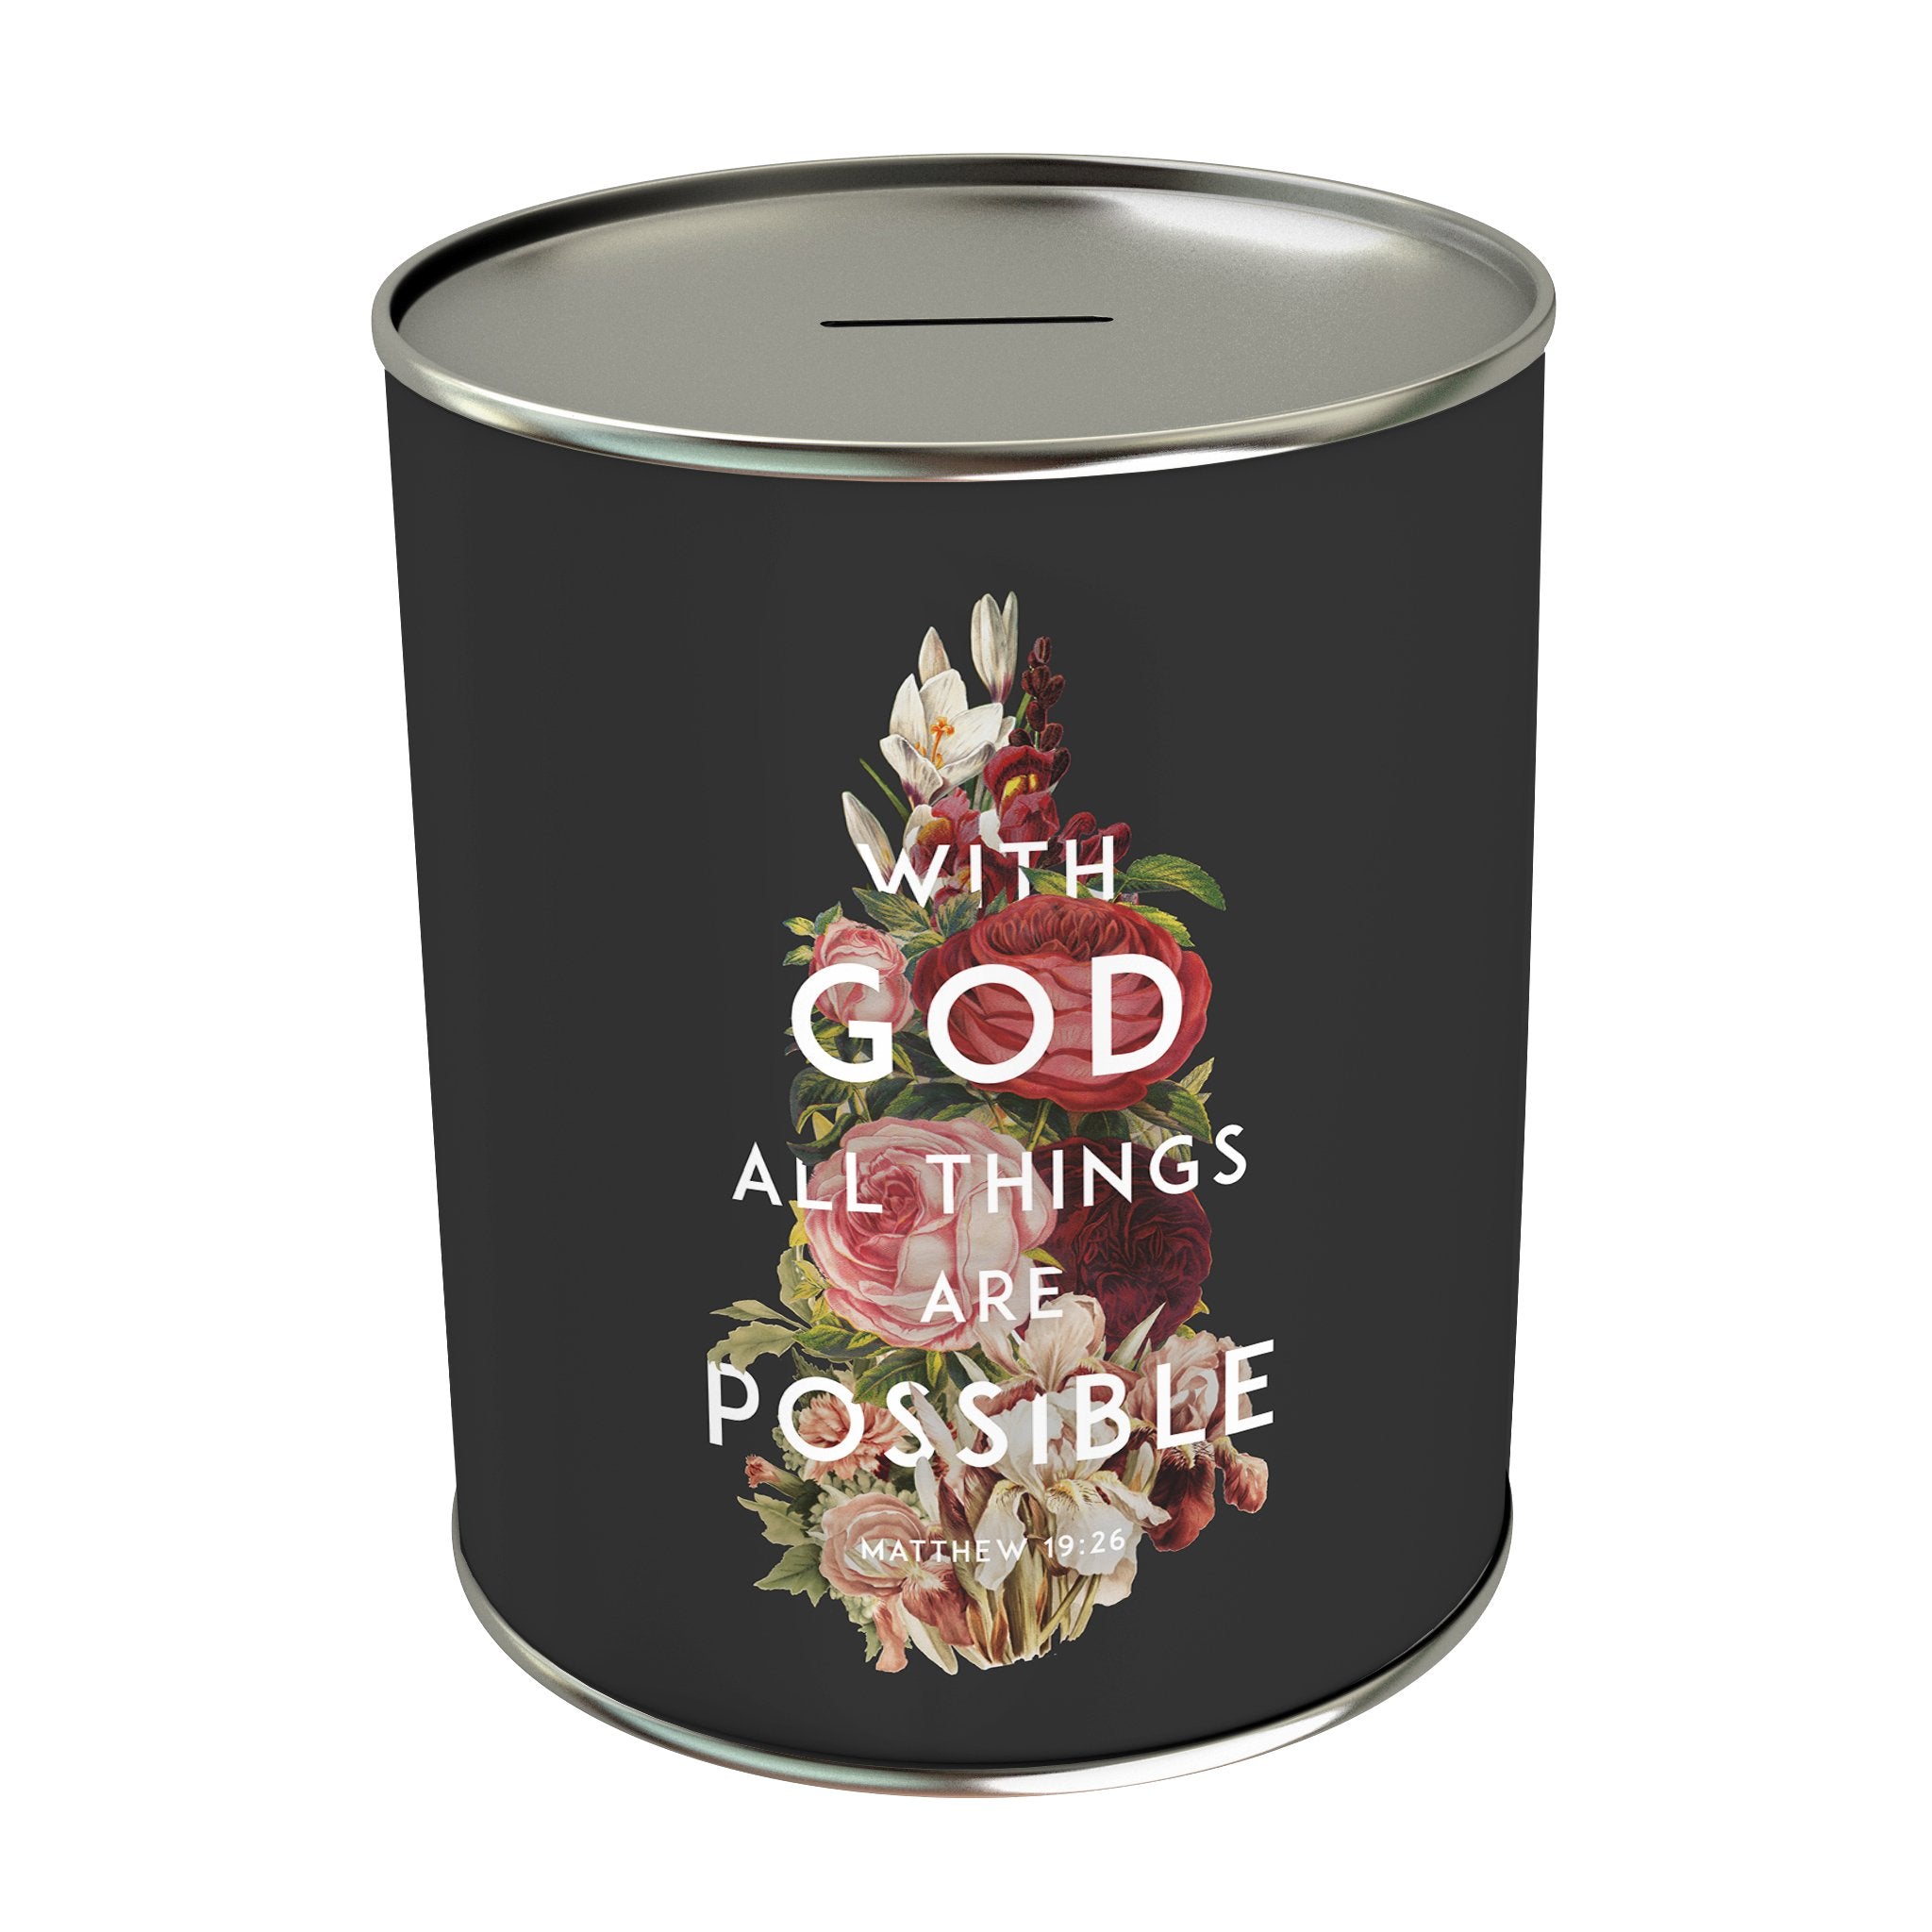 God's Garden: With God All Things Are Possible Coin Bank